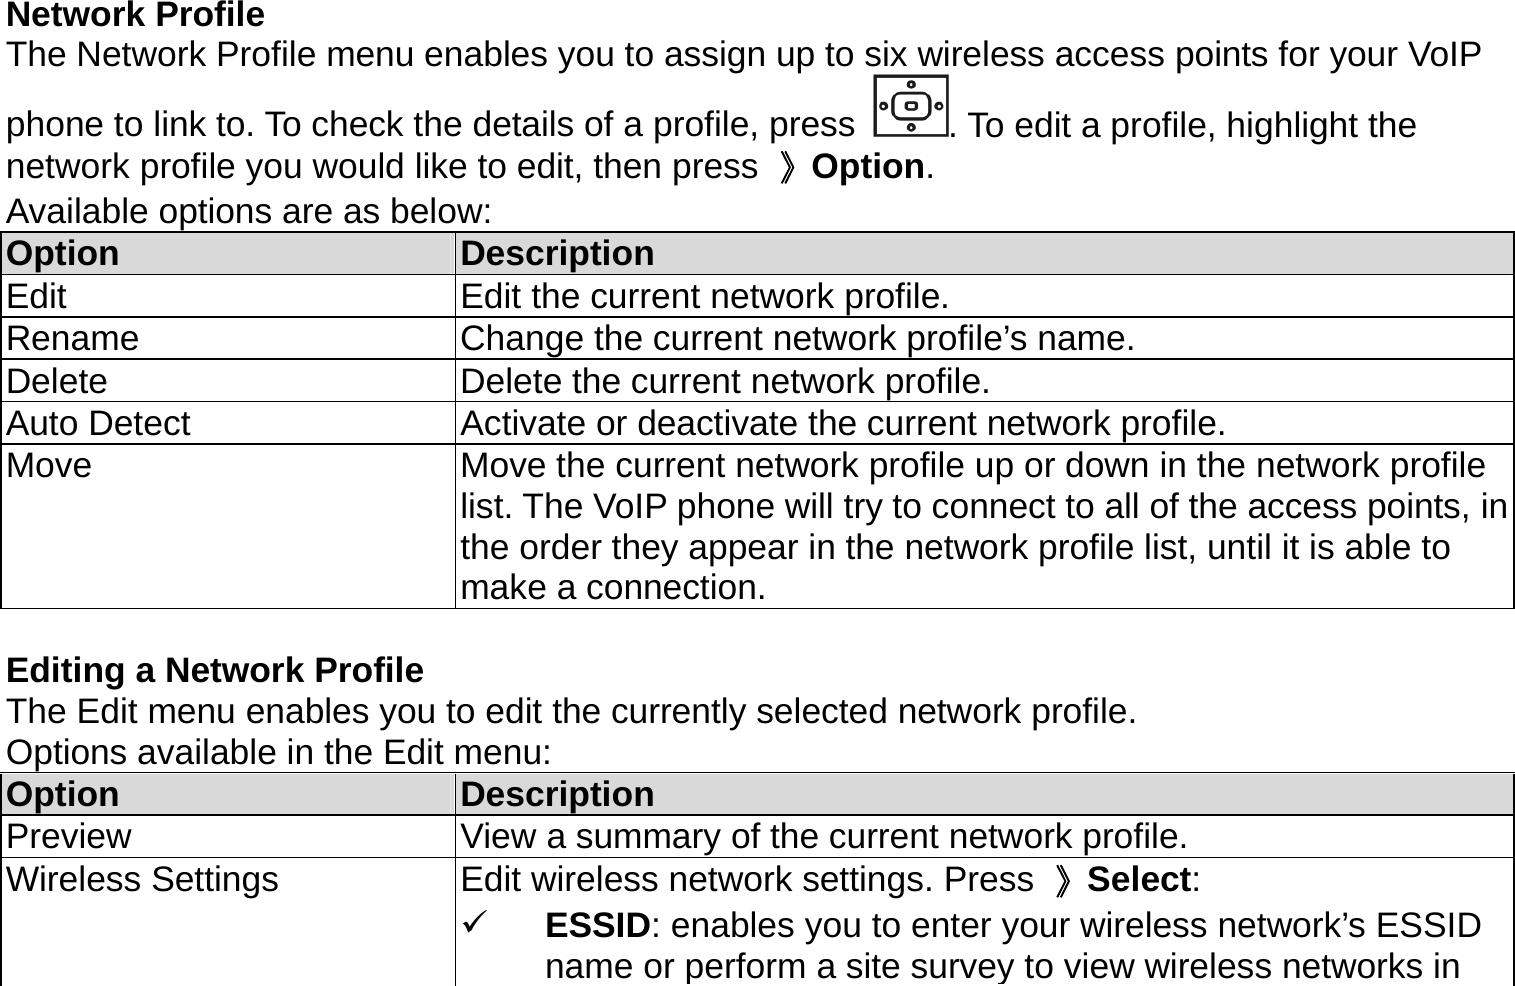 Network Profile The Network Profile menu enables you to assign up to six wireless access points for your VoIP   phone to link to. To check the details of a profile, press  . To edit a profile, highlight the network profile you would like to edit, then press  》Option.  Available options are as below: Option  Description Edit  Edit the current network profile. Rename  Change the current network profile’s name. Delete  Delete the current network profile. Auto Detect  Activate or deactivate the current network profile. Move  Move the current network profile up or down in the network profile list. The VoIP phone will try to connect to all of the access points, in the order they appear in the network profile list, until it is able to make a connection.  Editing a Network Profile The Edit menu enables you to edit the currently selected network profile.   Options available in the Edit menu: Option  Description Preview  View a summary of the current network profile. Wireless Settings  Edit wireless network settings. Press  》Select:   ESSID: enables you to enter your wireless network’s ESSID name or perform a site survey to view wireless networks in 